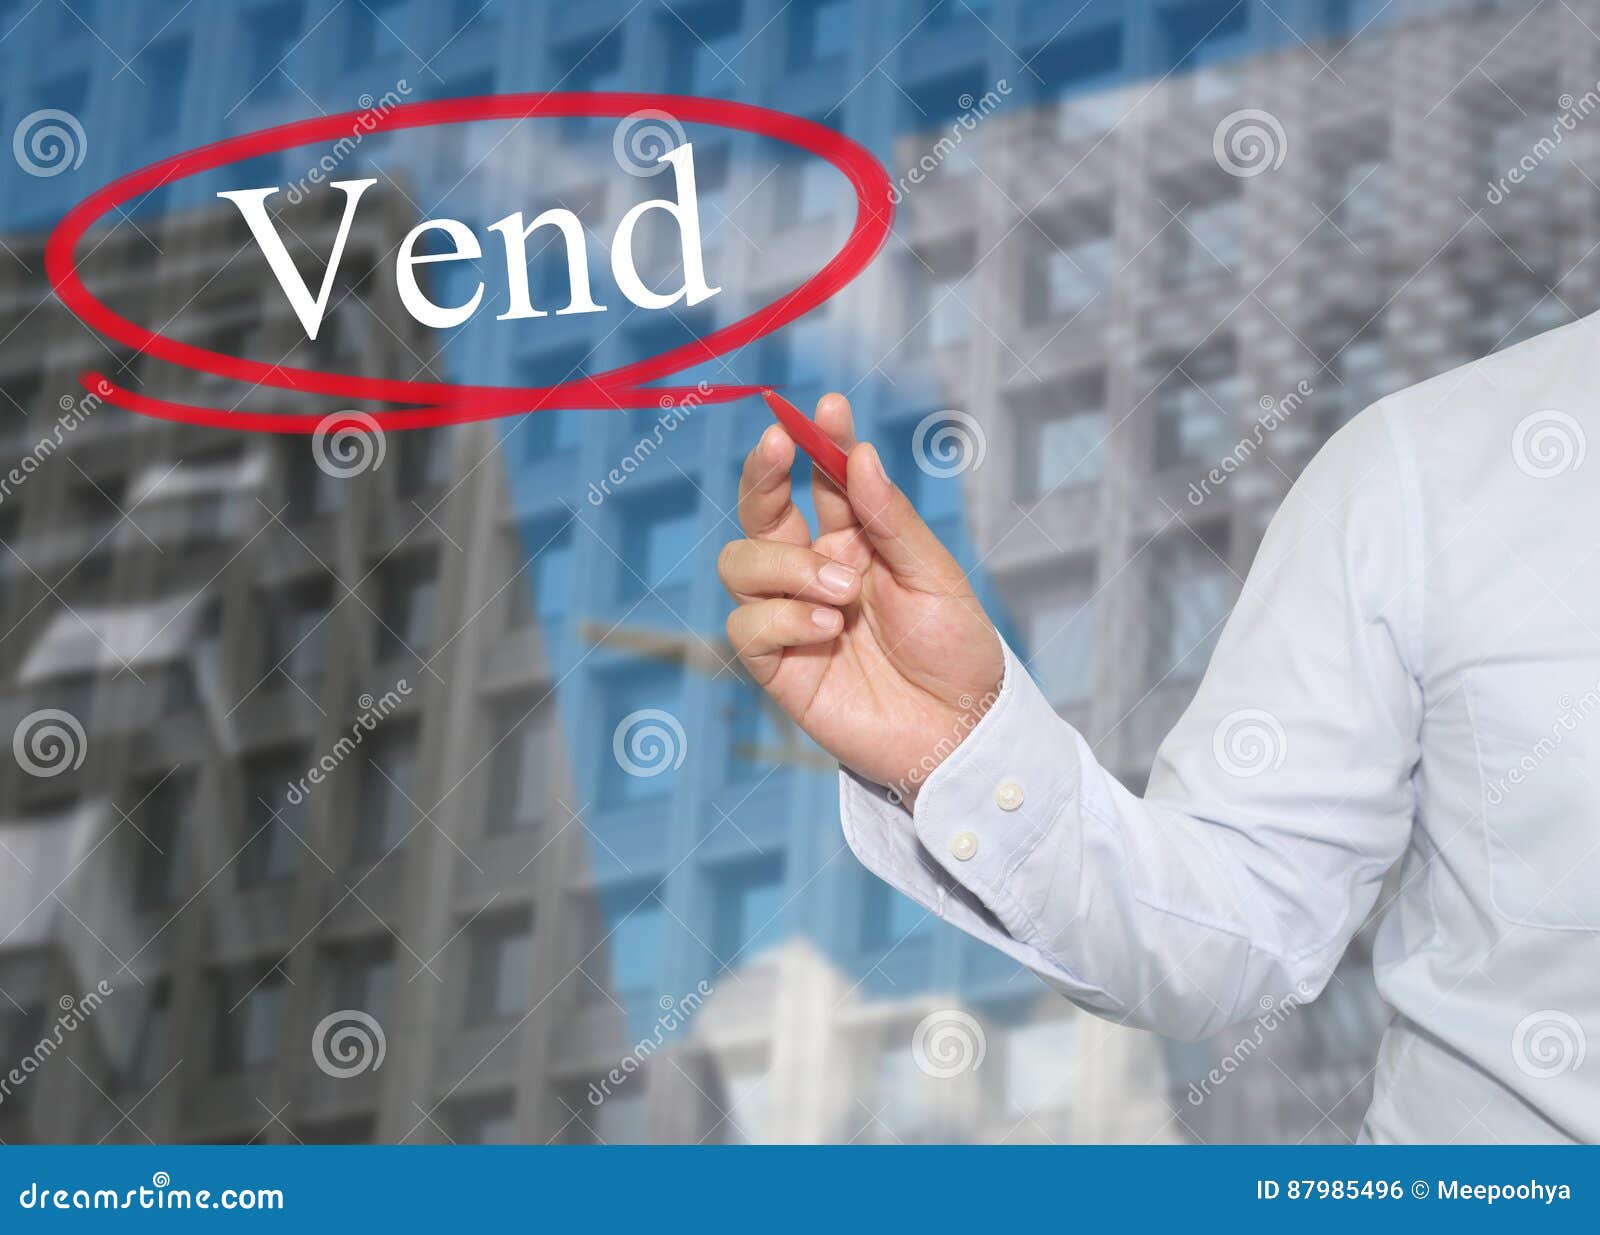 hand of young businessman write the word vend on skyscrapers background.